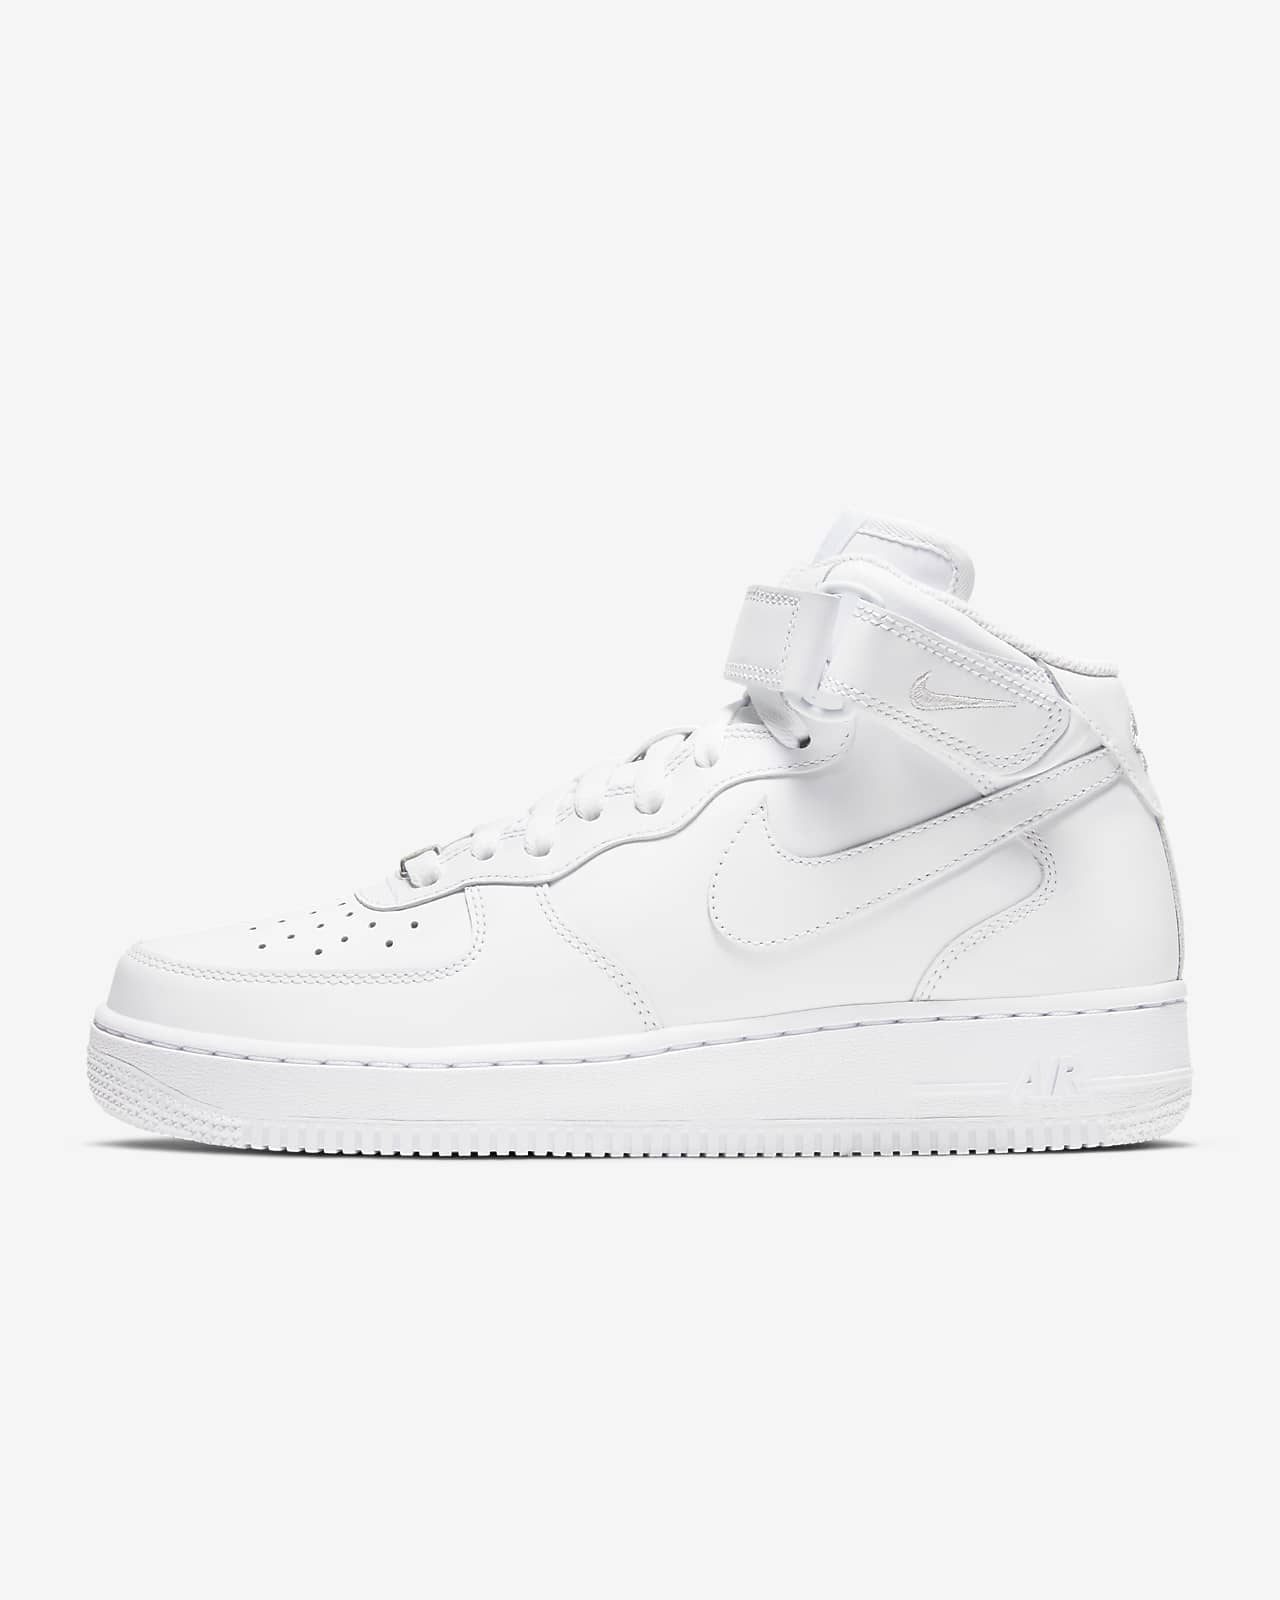 Low Resolution Nike Air Force 1 '07 Mid Women's Shoe